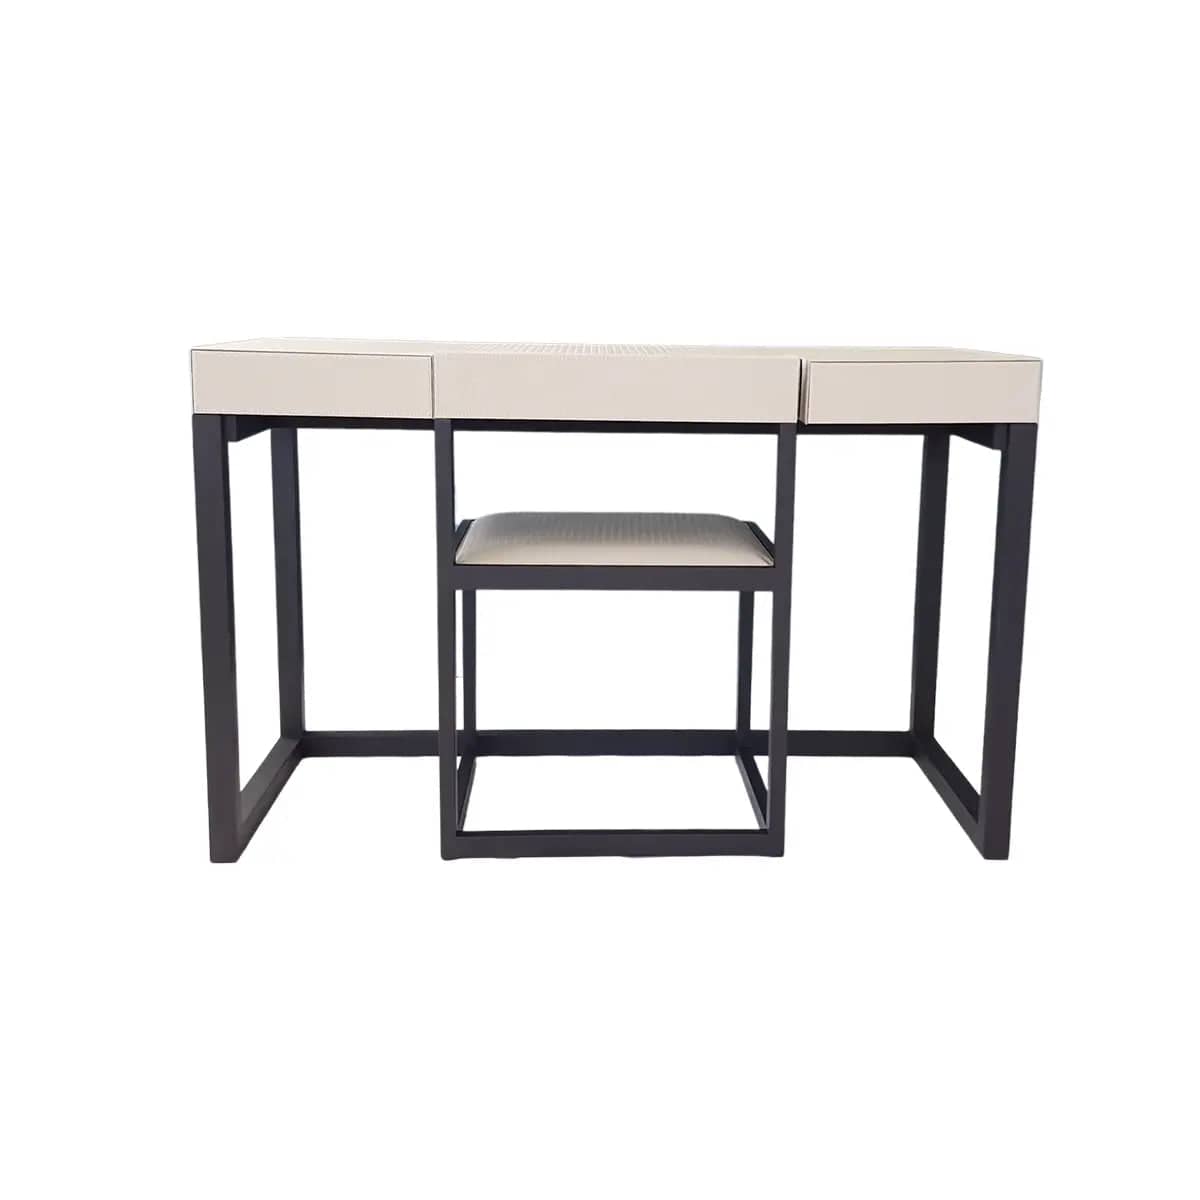 Eccotrading Design London Living Compact Desk and Chair Woven Pumice Leather House of Isabella UK